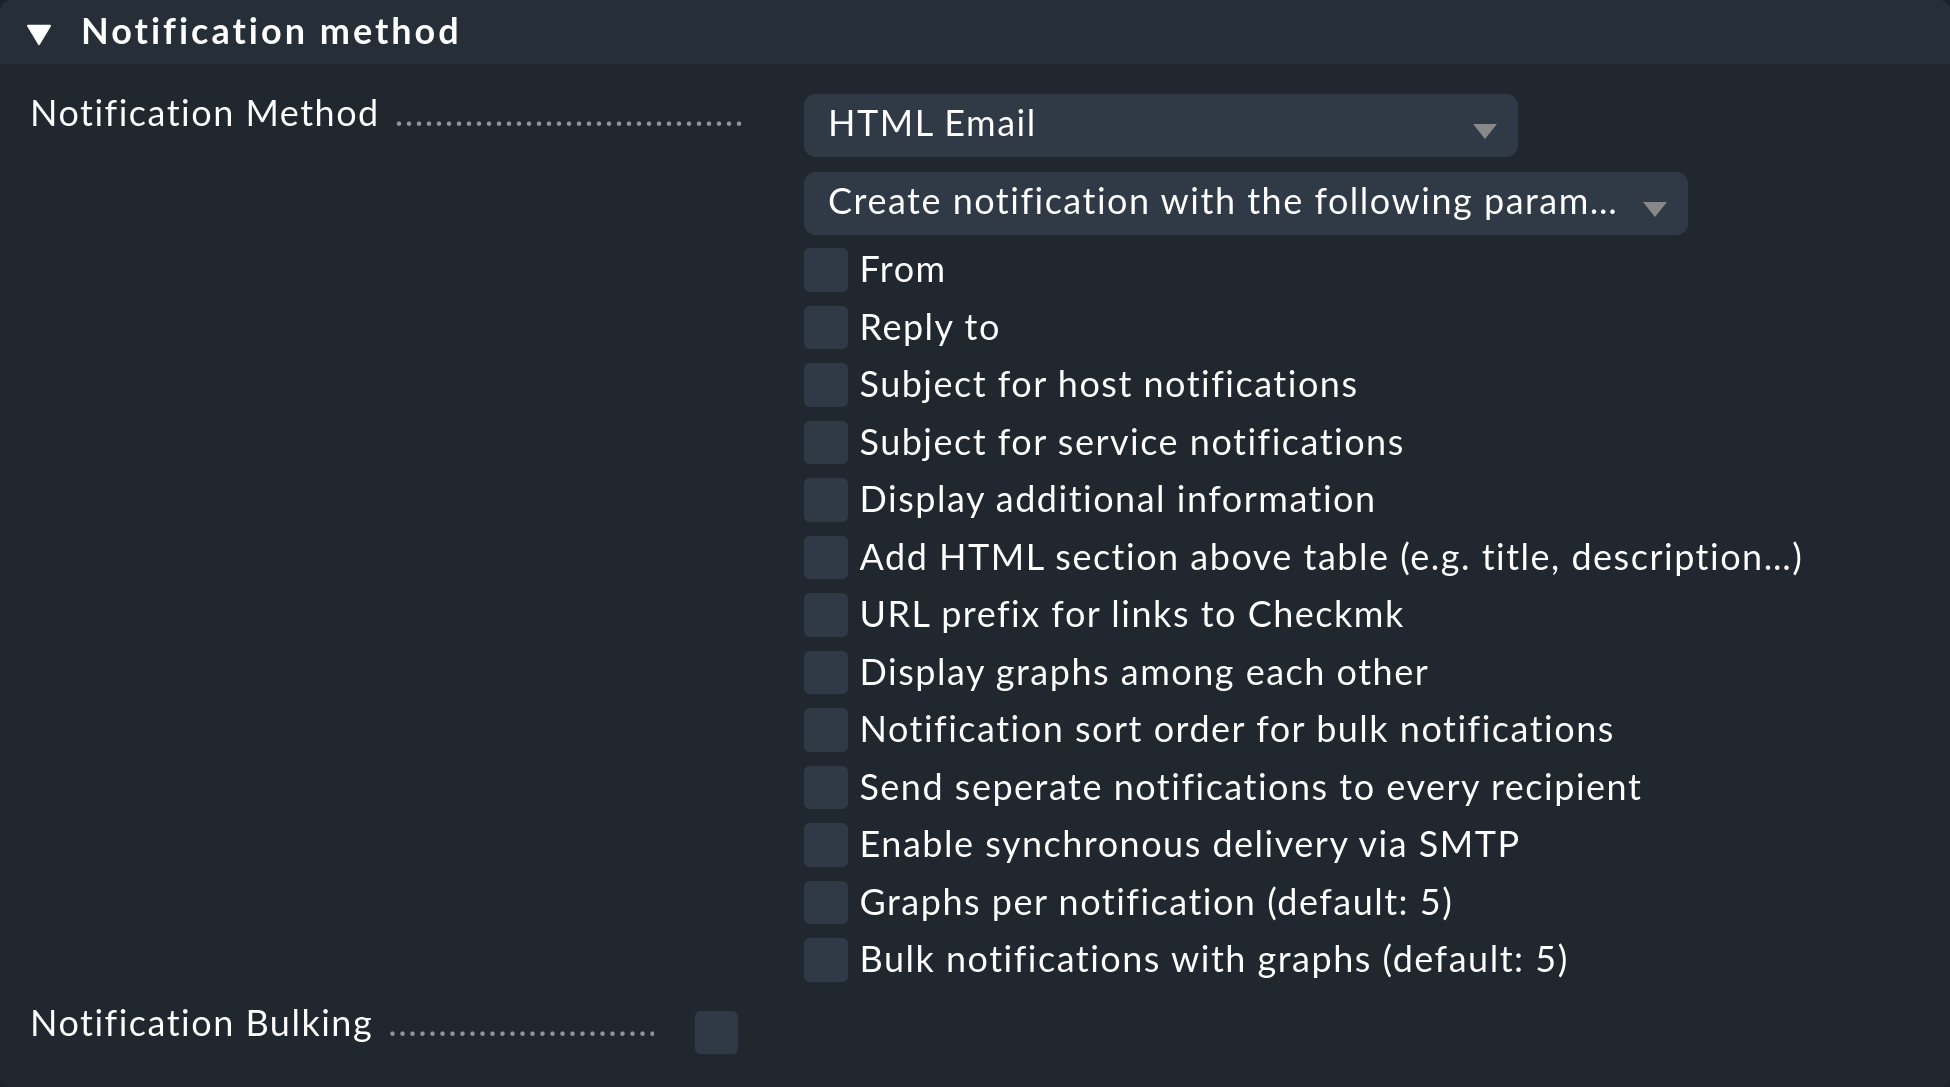 Rule with notification method options.